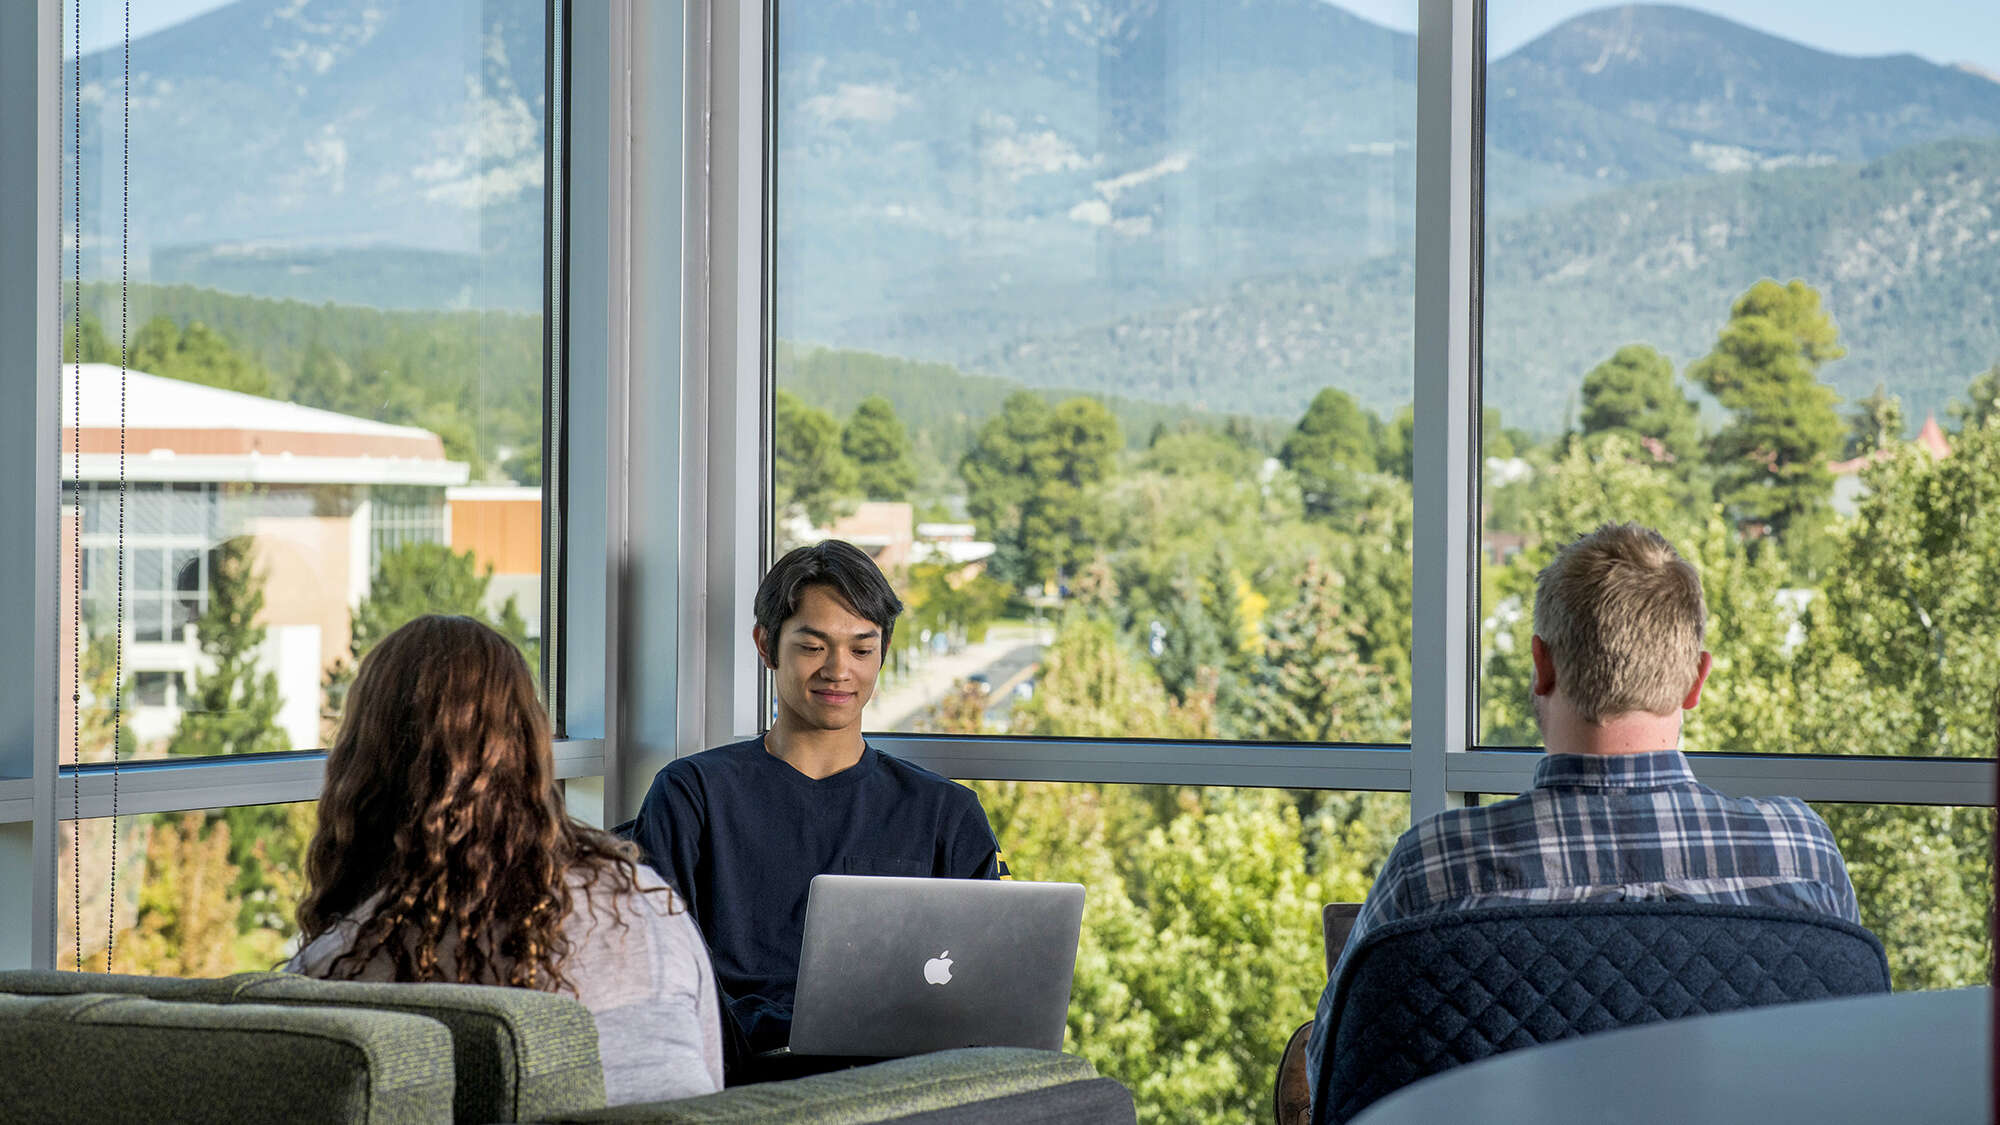 3 students studying with view of mountains through large windows